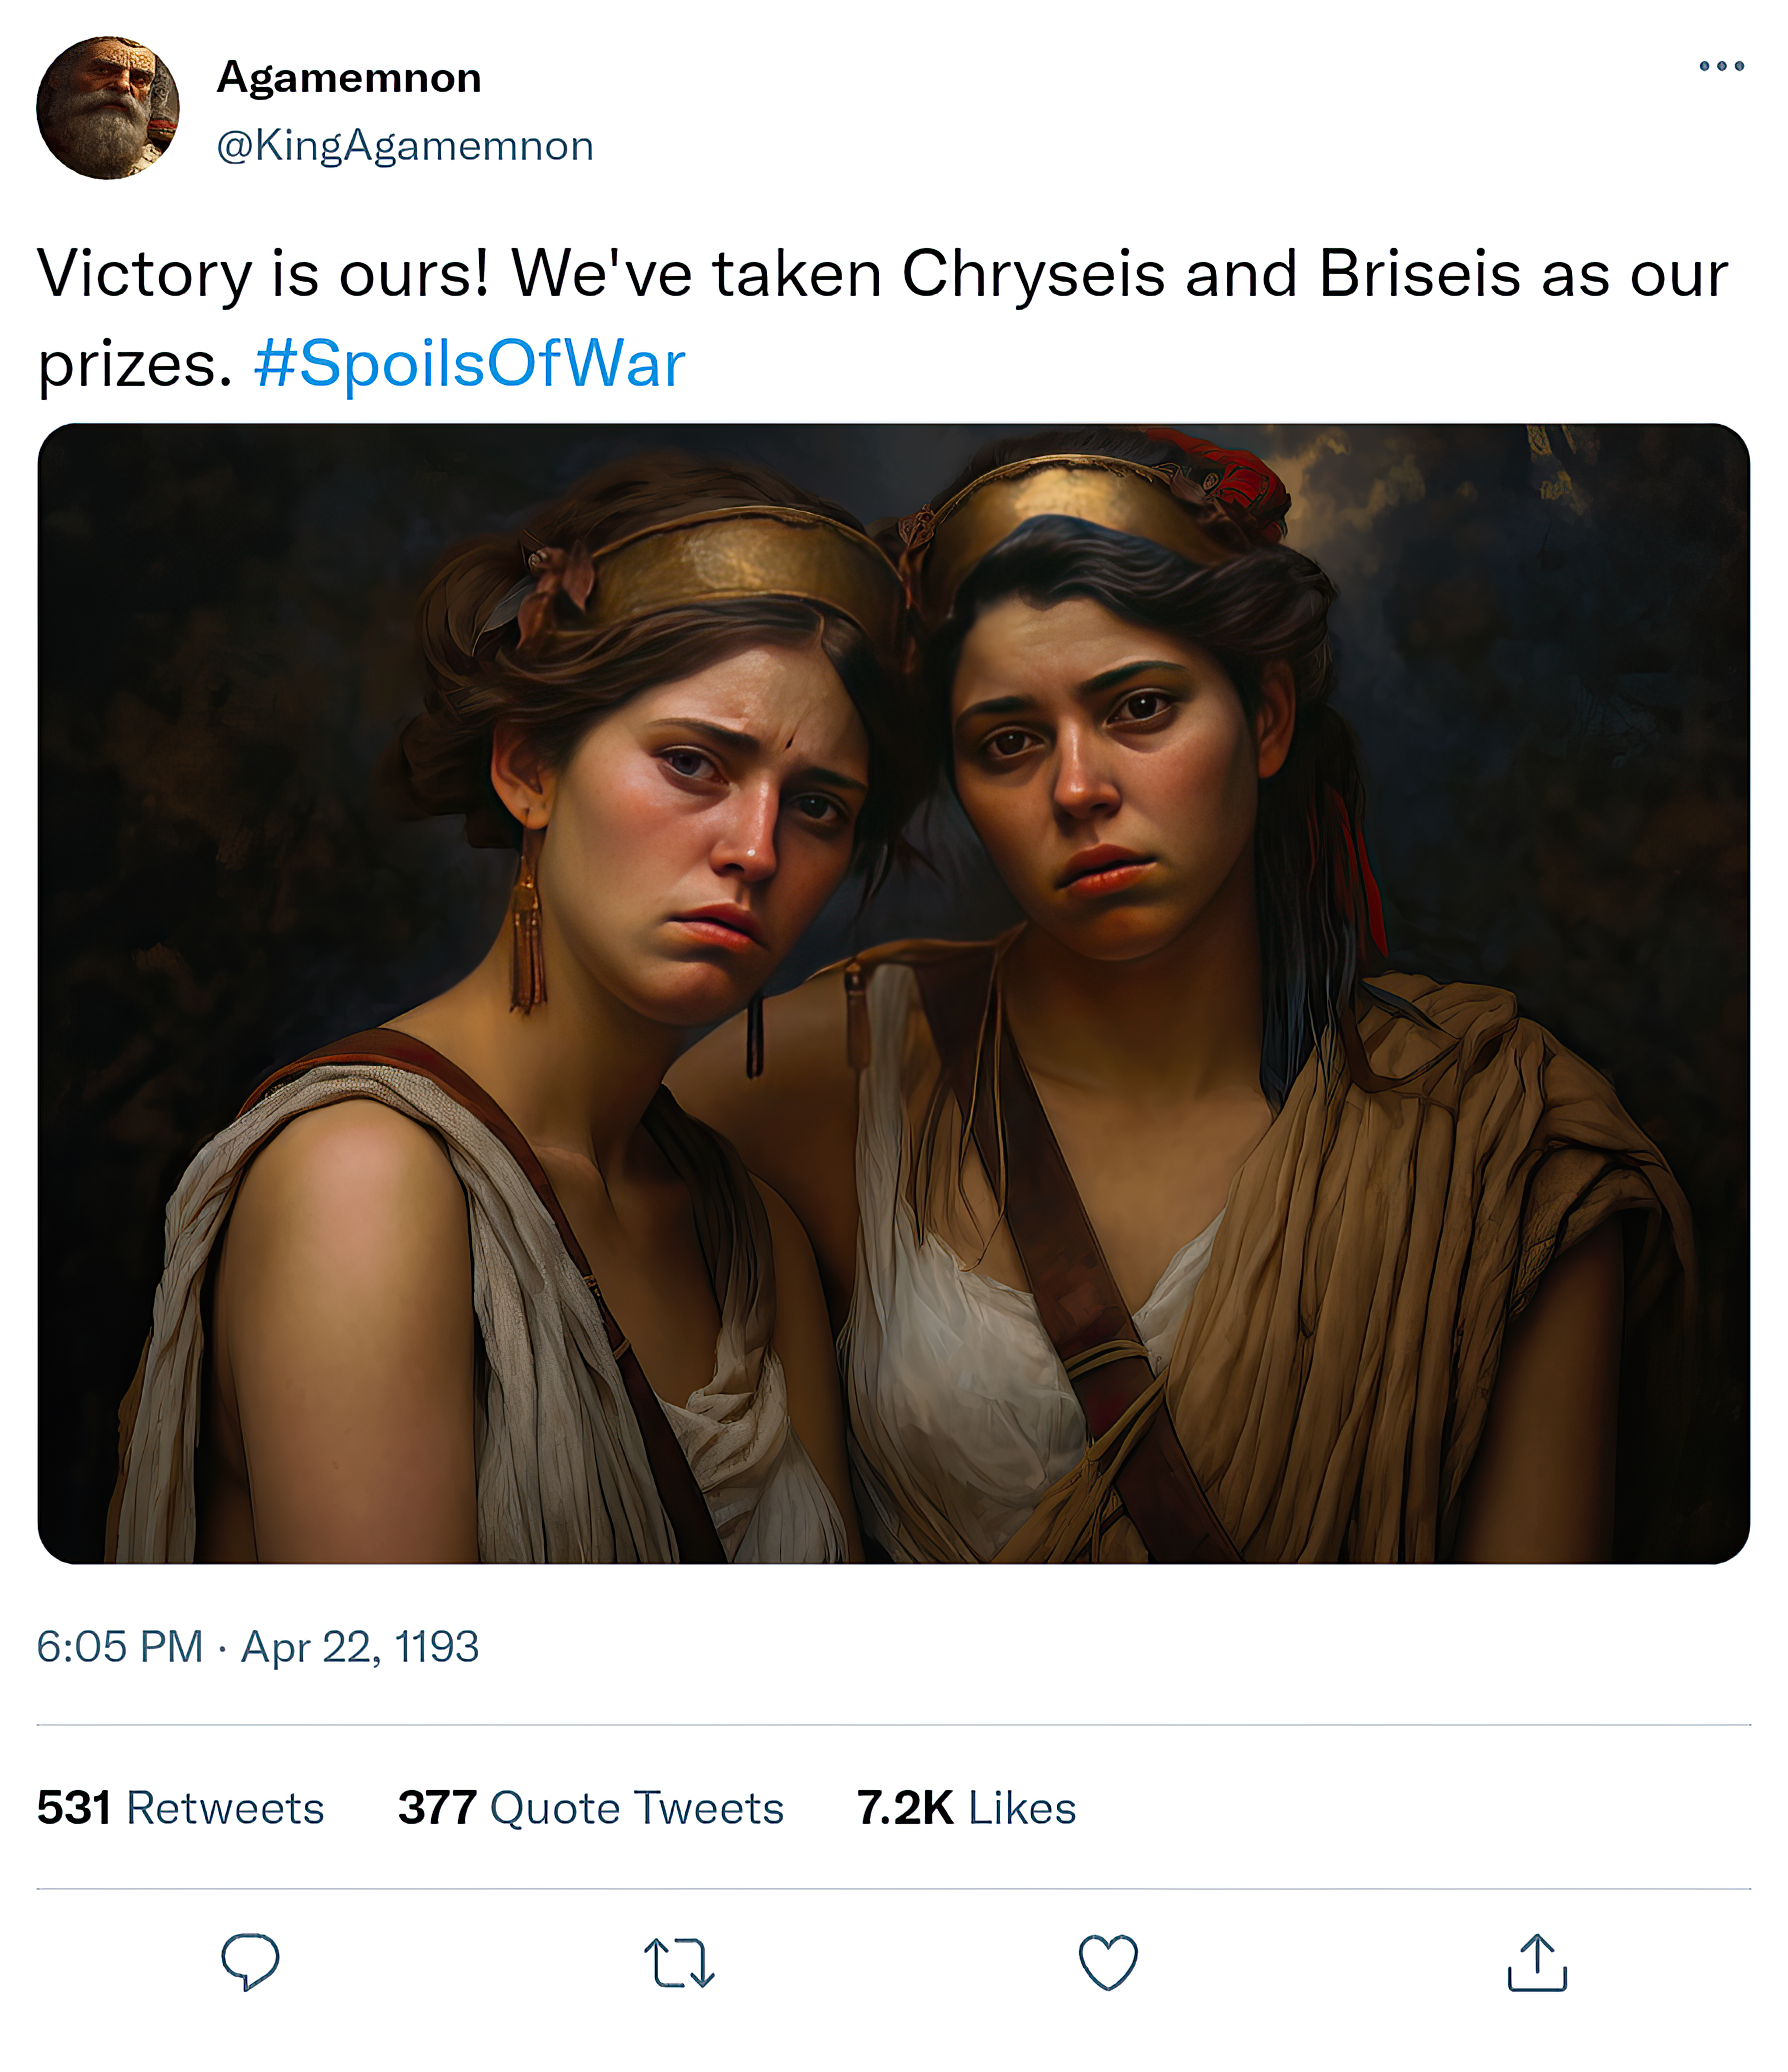 [Tweet] @KingAgamemnon: Victory is ours! We've taken Chryseis and Briseis as our prizes. #SpoilsOfWar